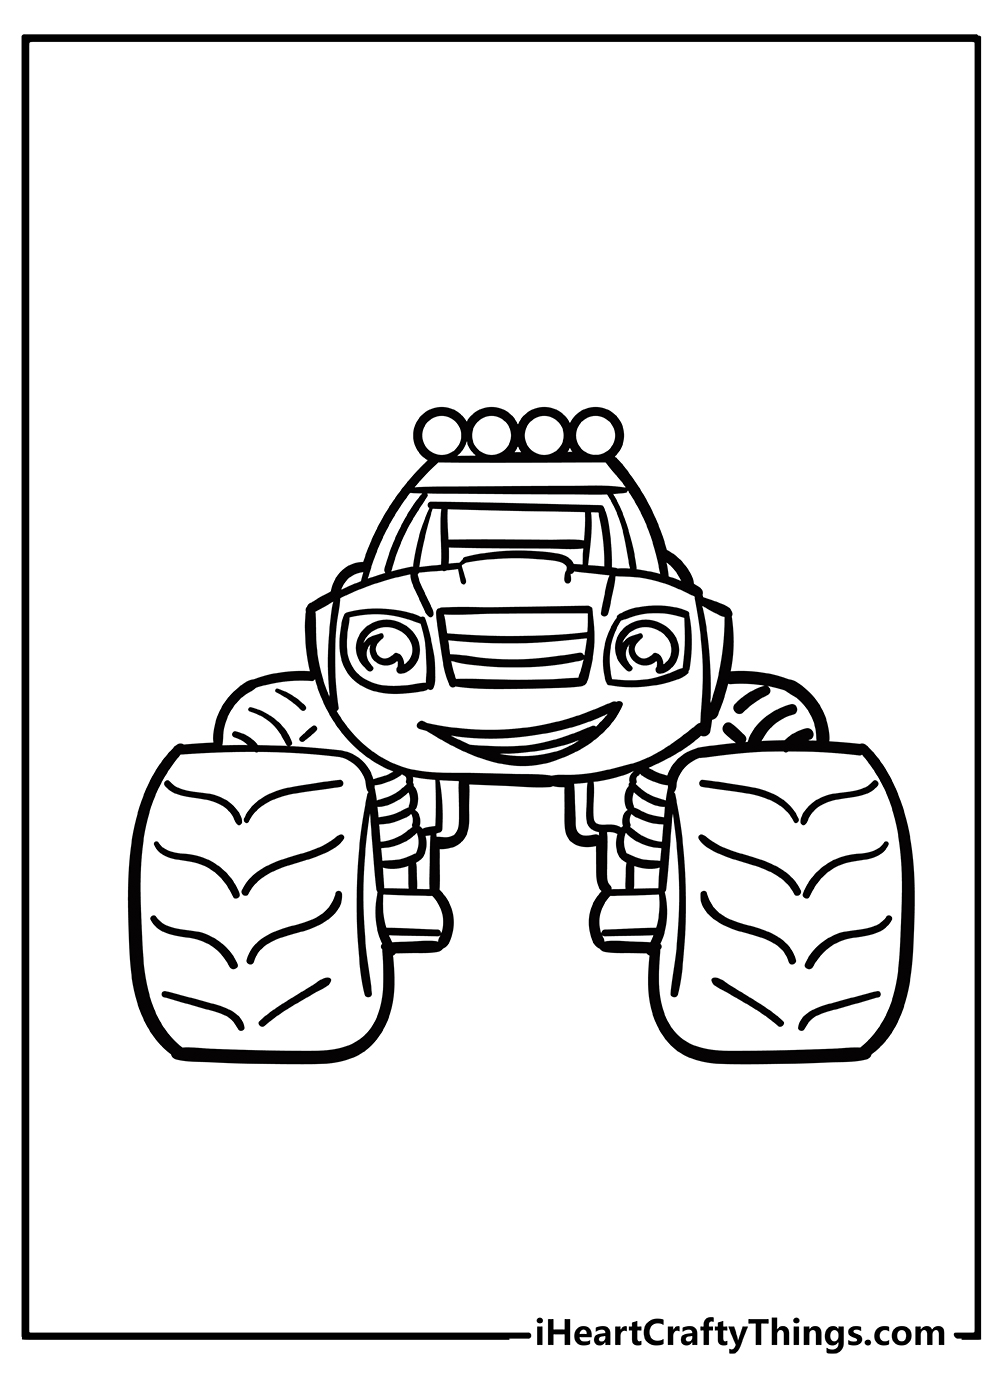 Blaze coloring pages free printables